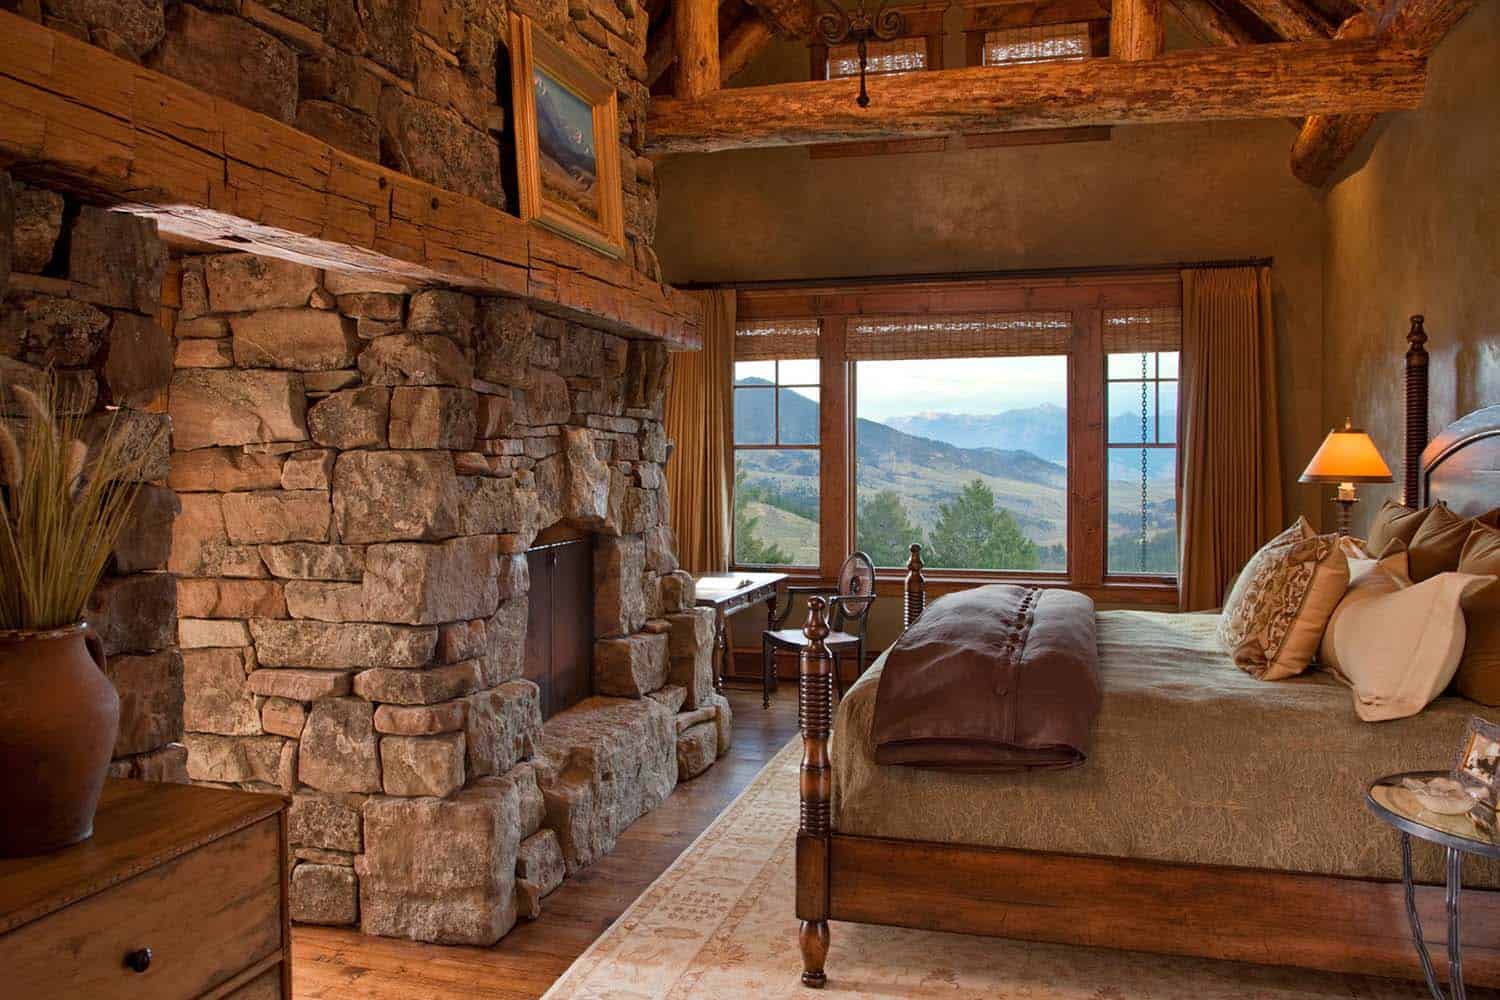 rustic bedroom with a fireplace